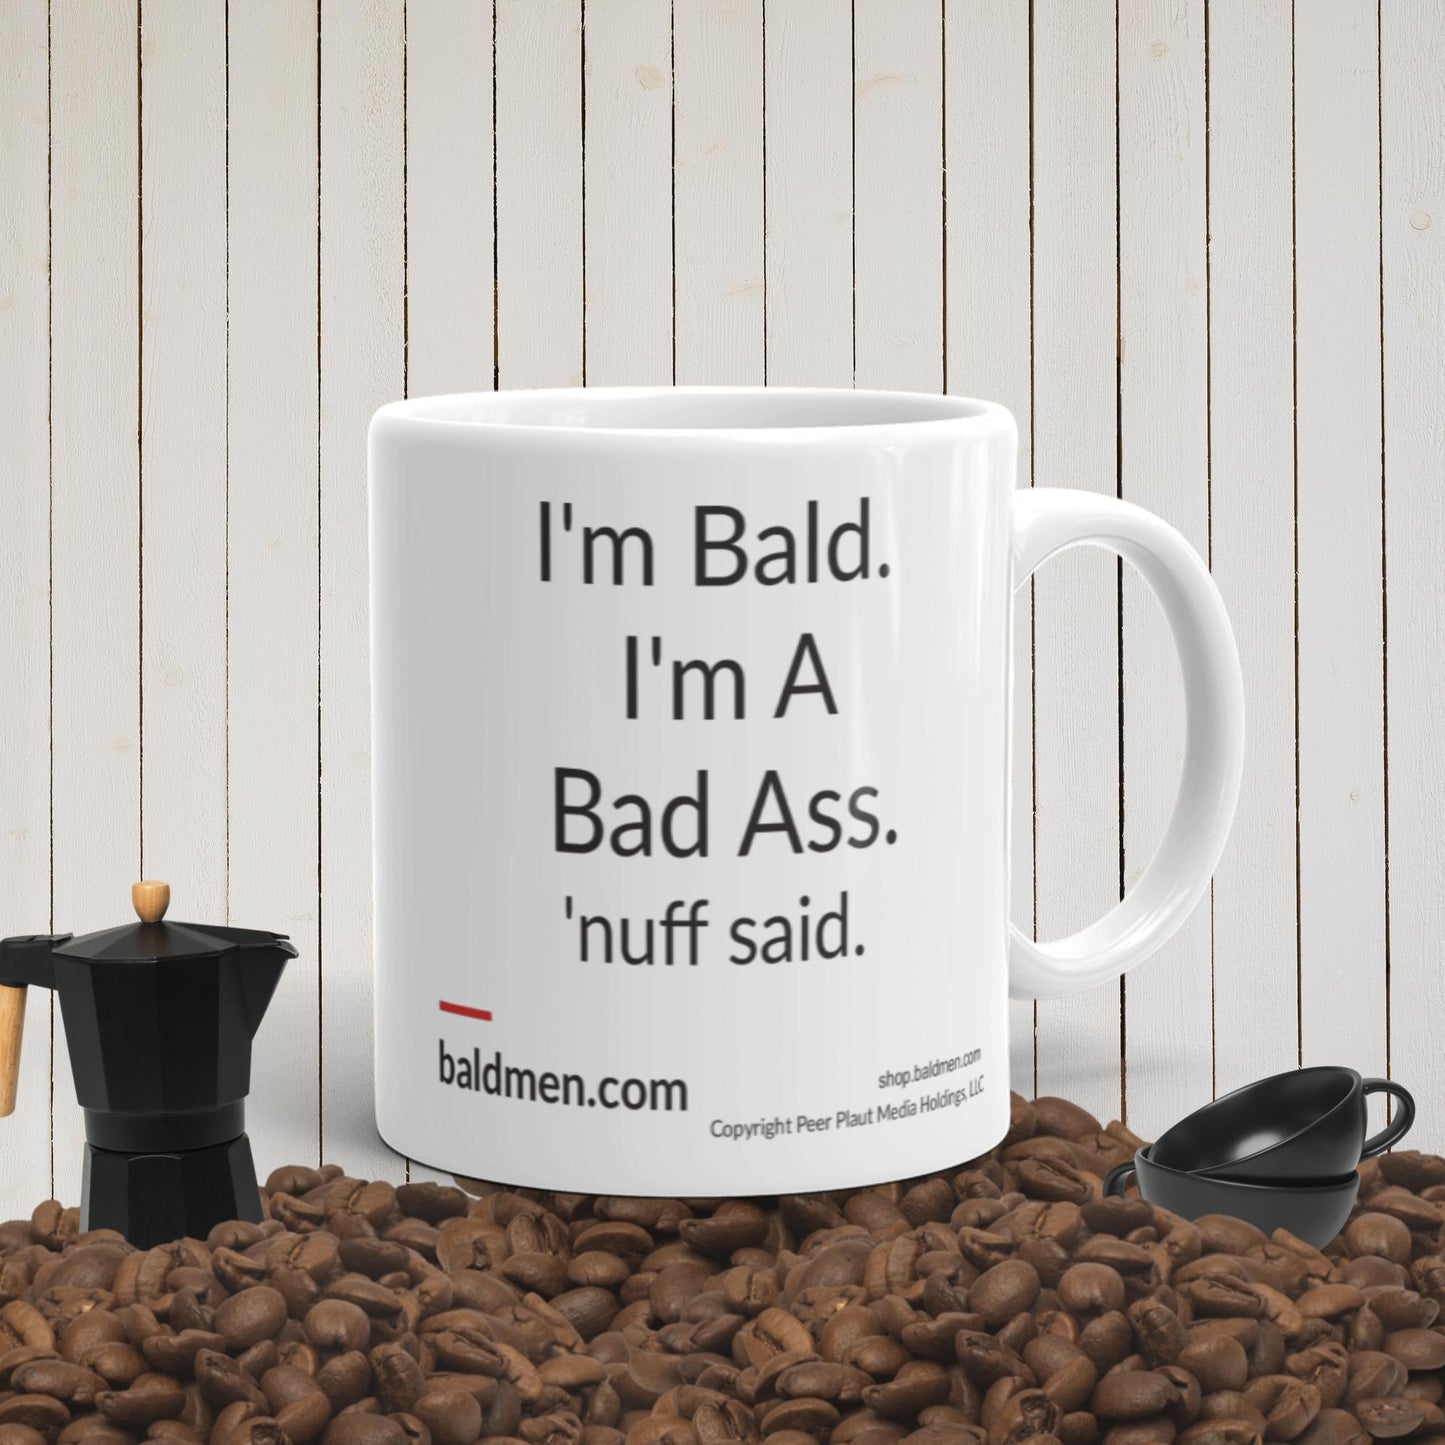 Celebrate your badassery with our I'm a Bad Ass Coffee Mug.